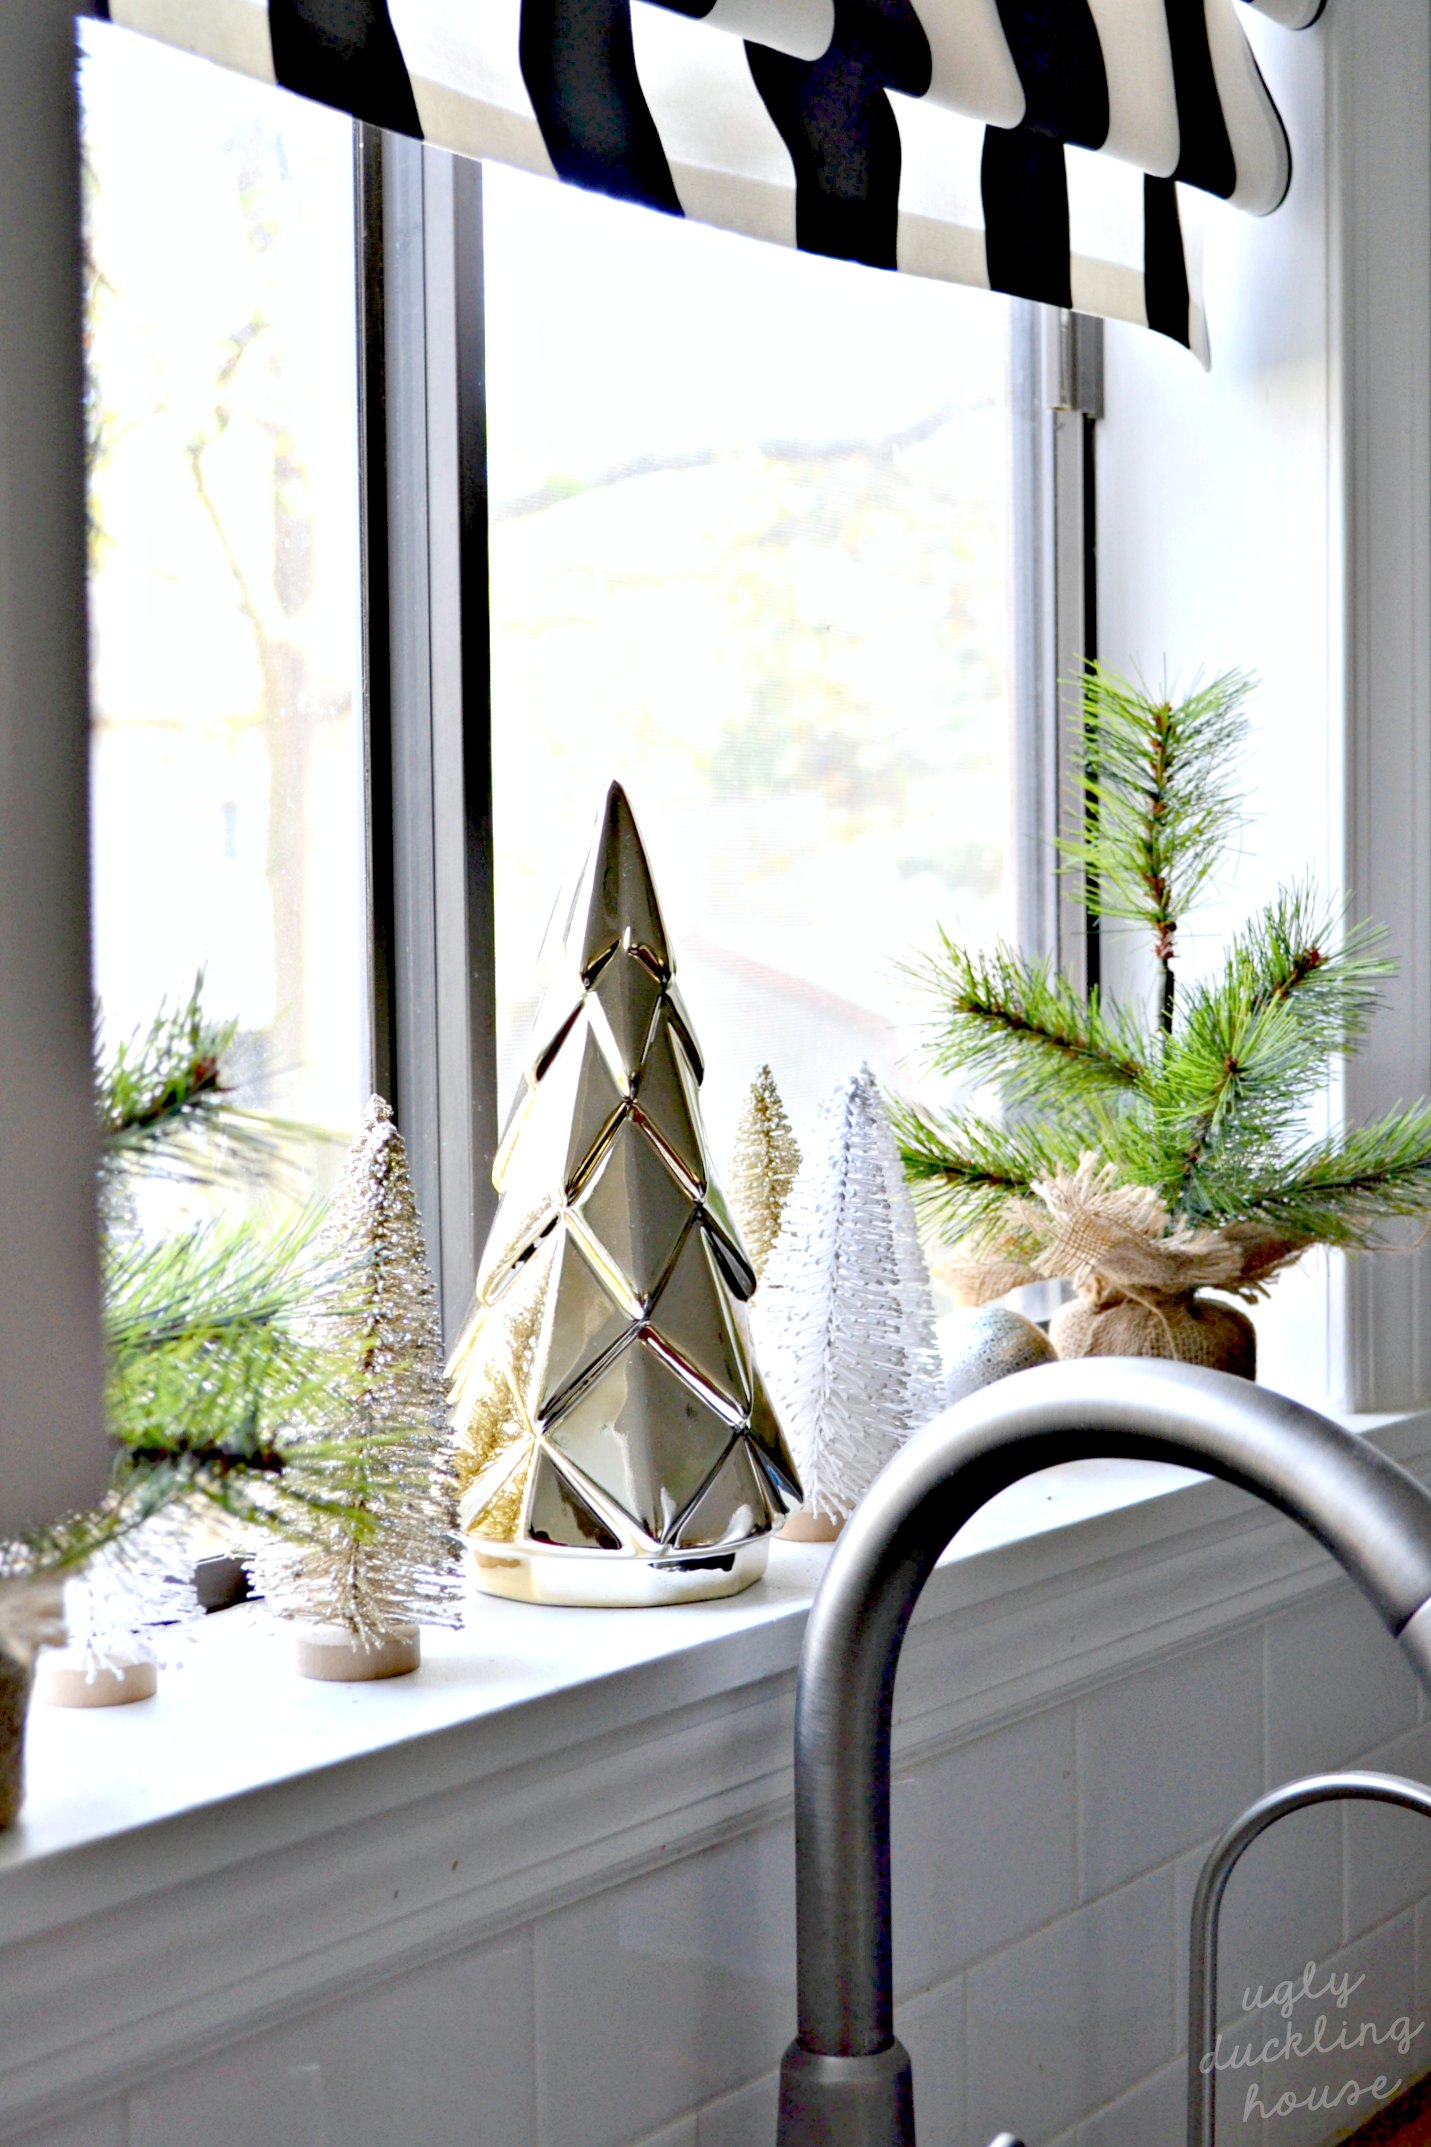 dont forget to decorate the kitchen window for christmas - gold and white neutral theme